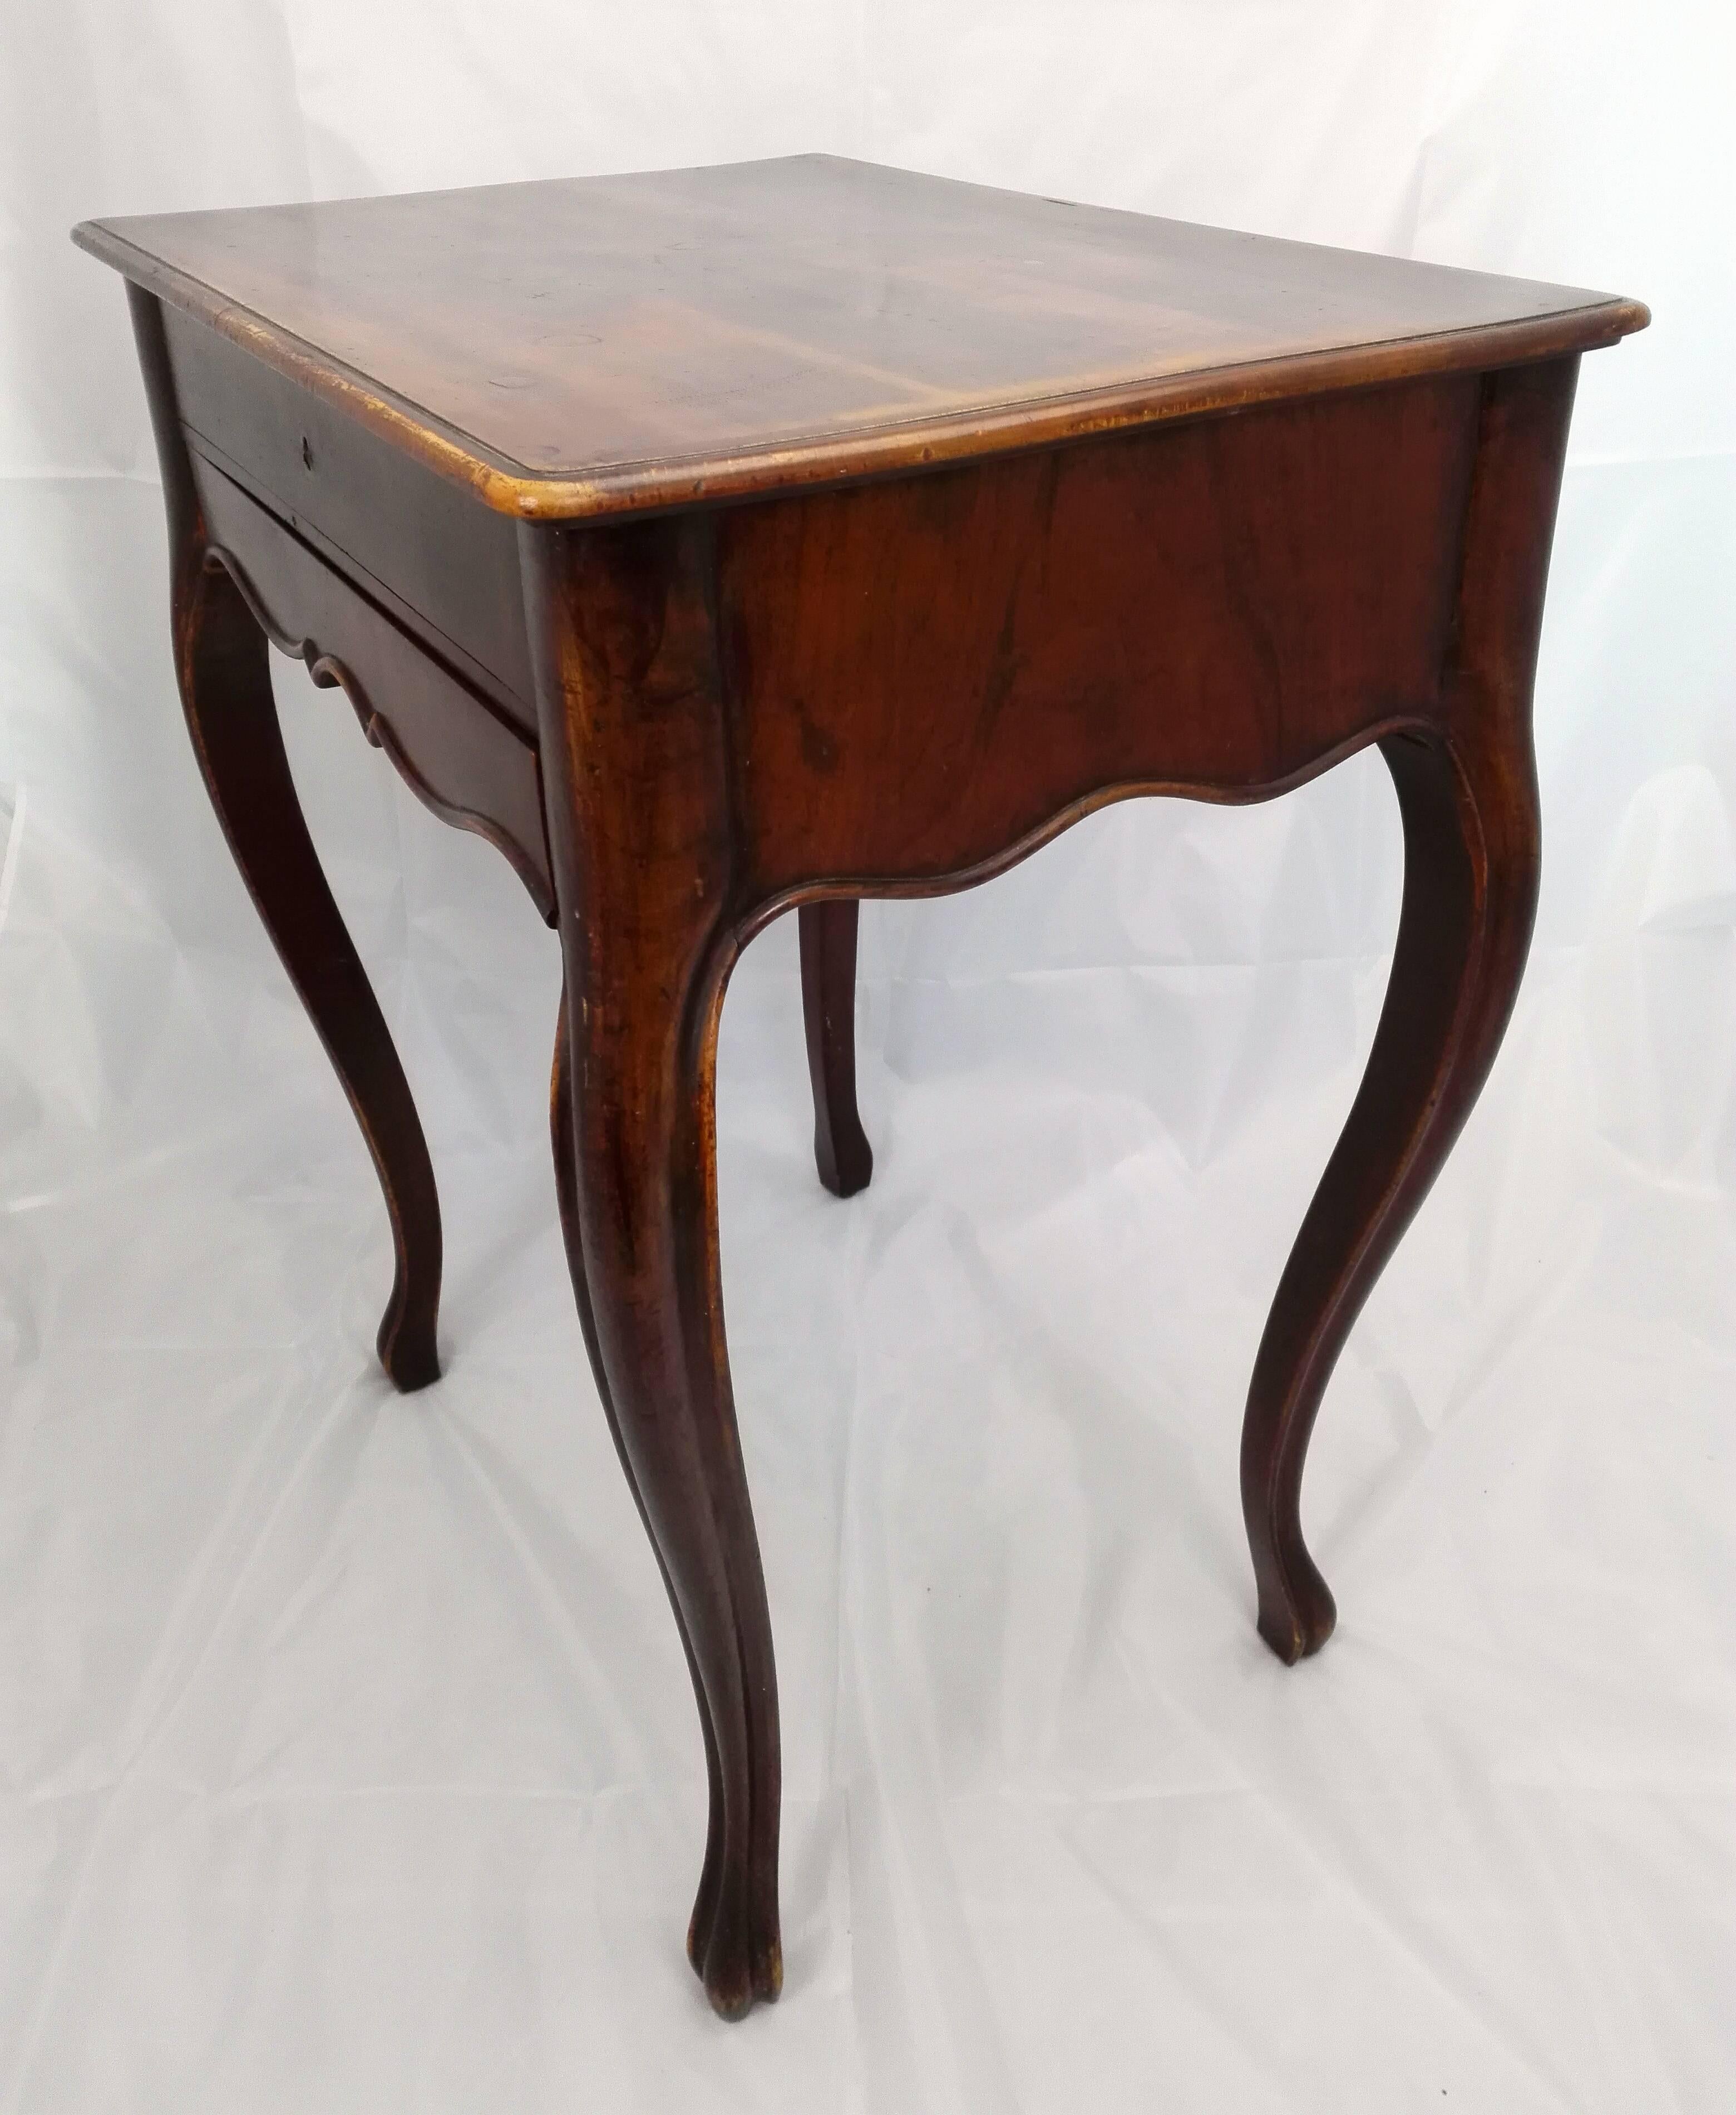 Georgian 19th Century Rococo Mahogany Curved Legs Side End Table Good Original Condition For Sale